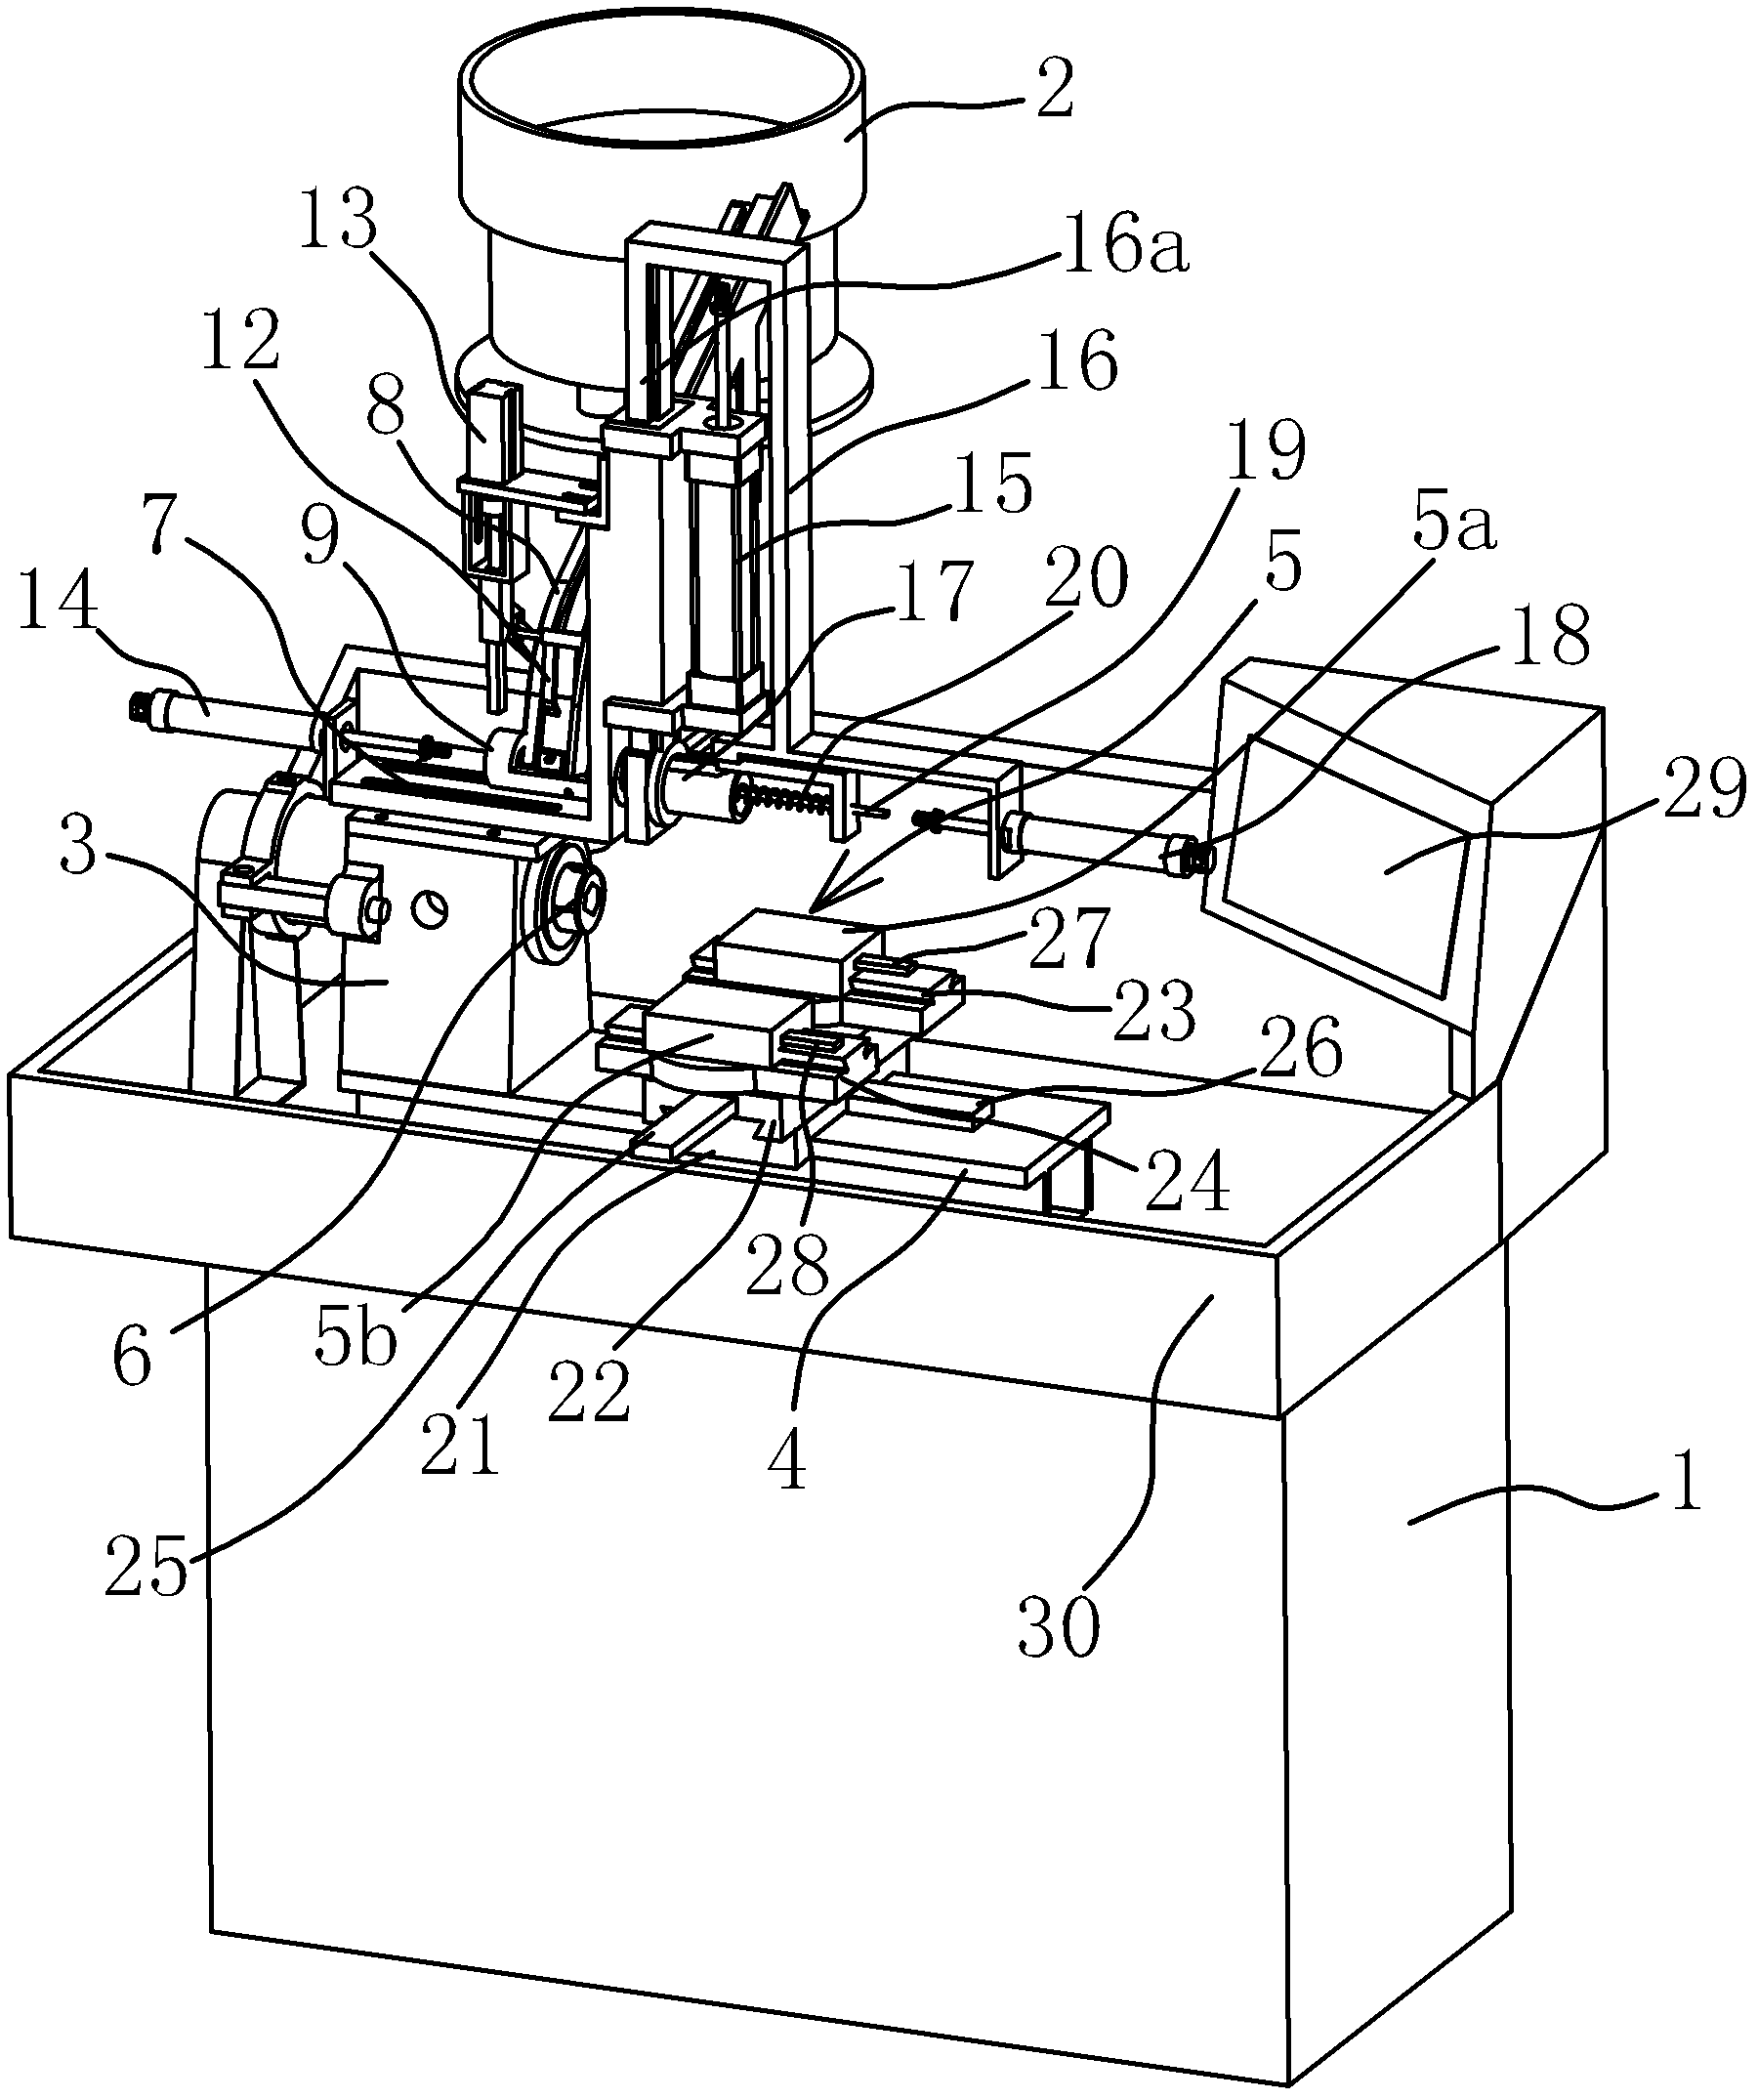 Processing machine tool for valve body connection hole